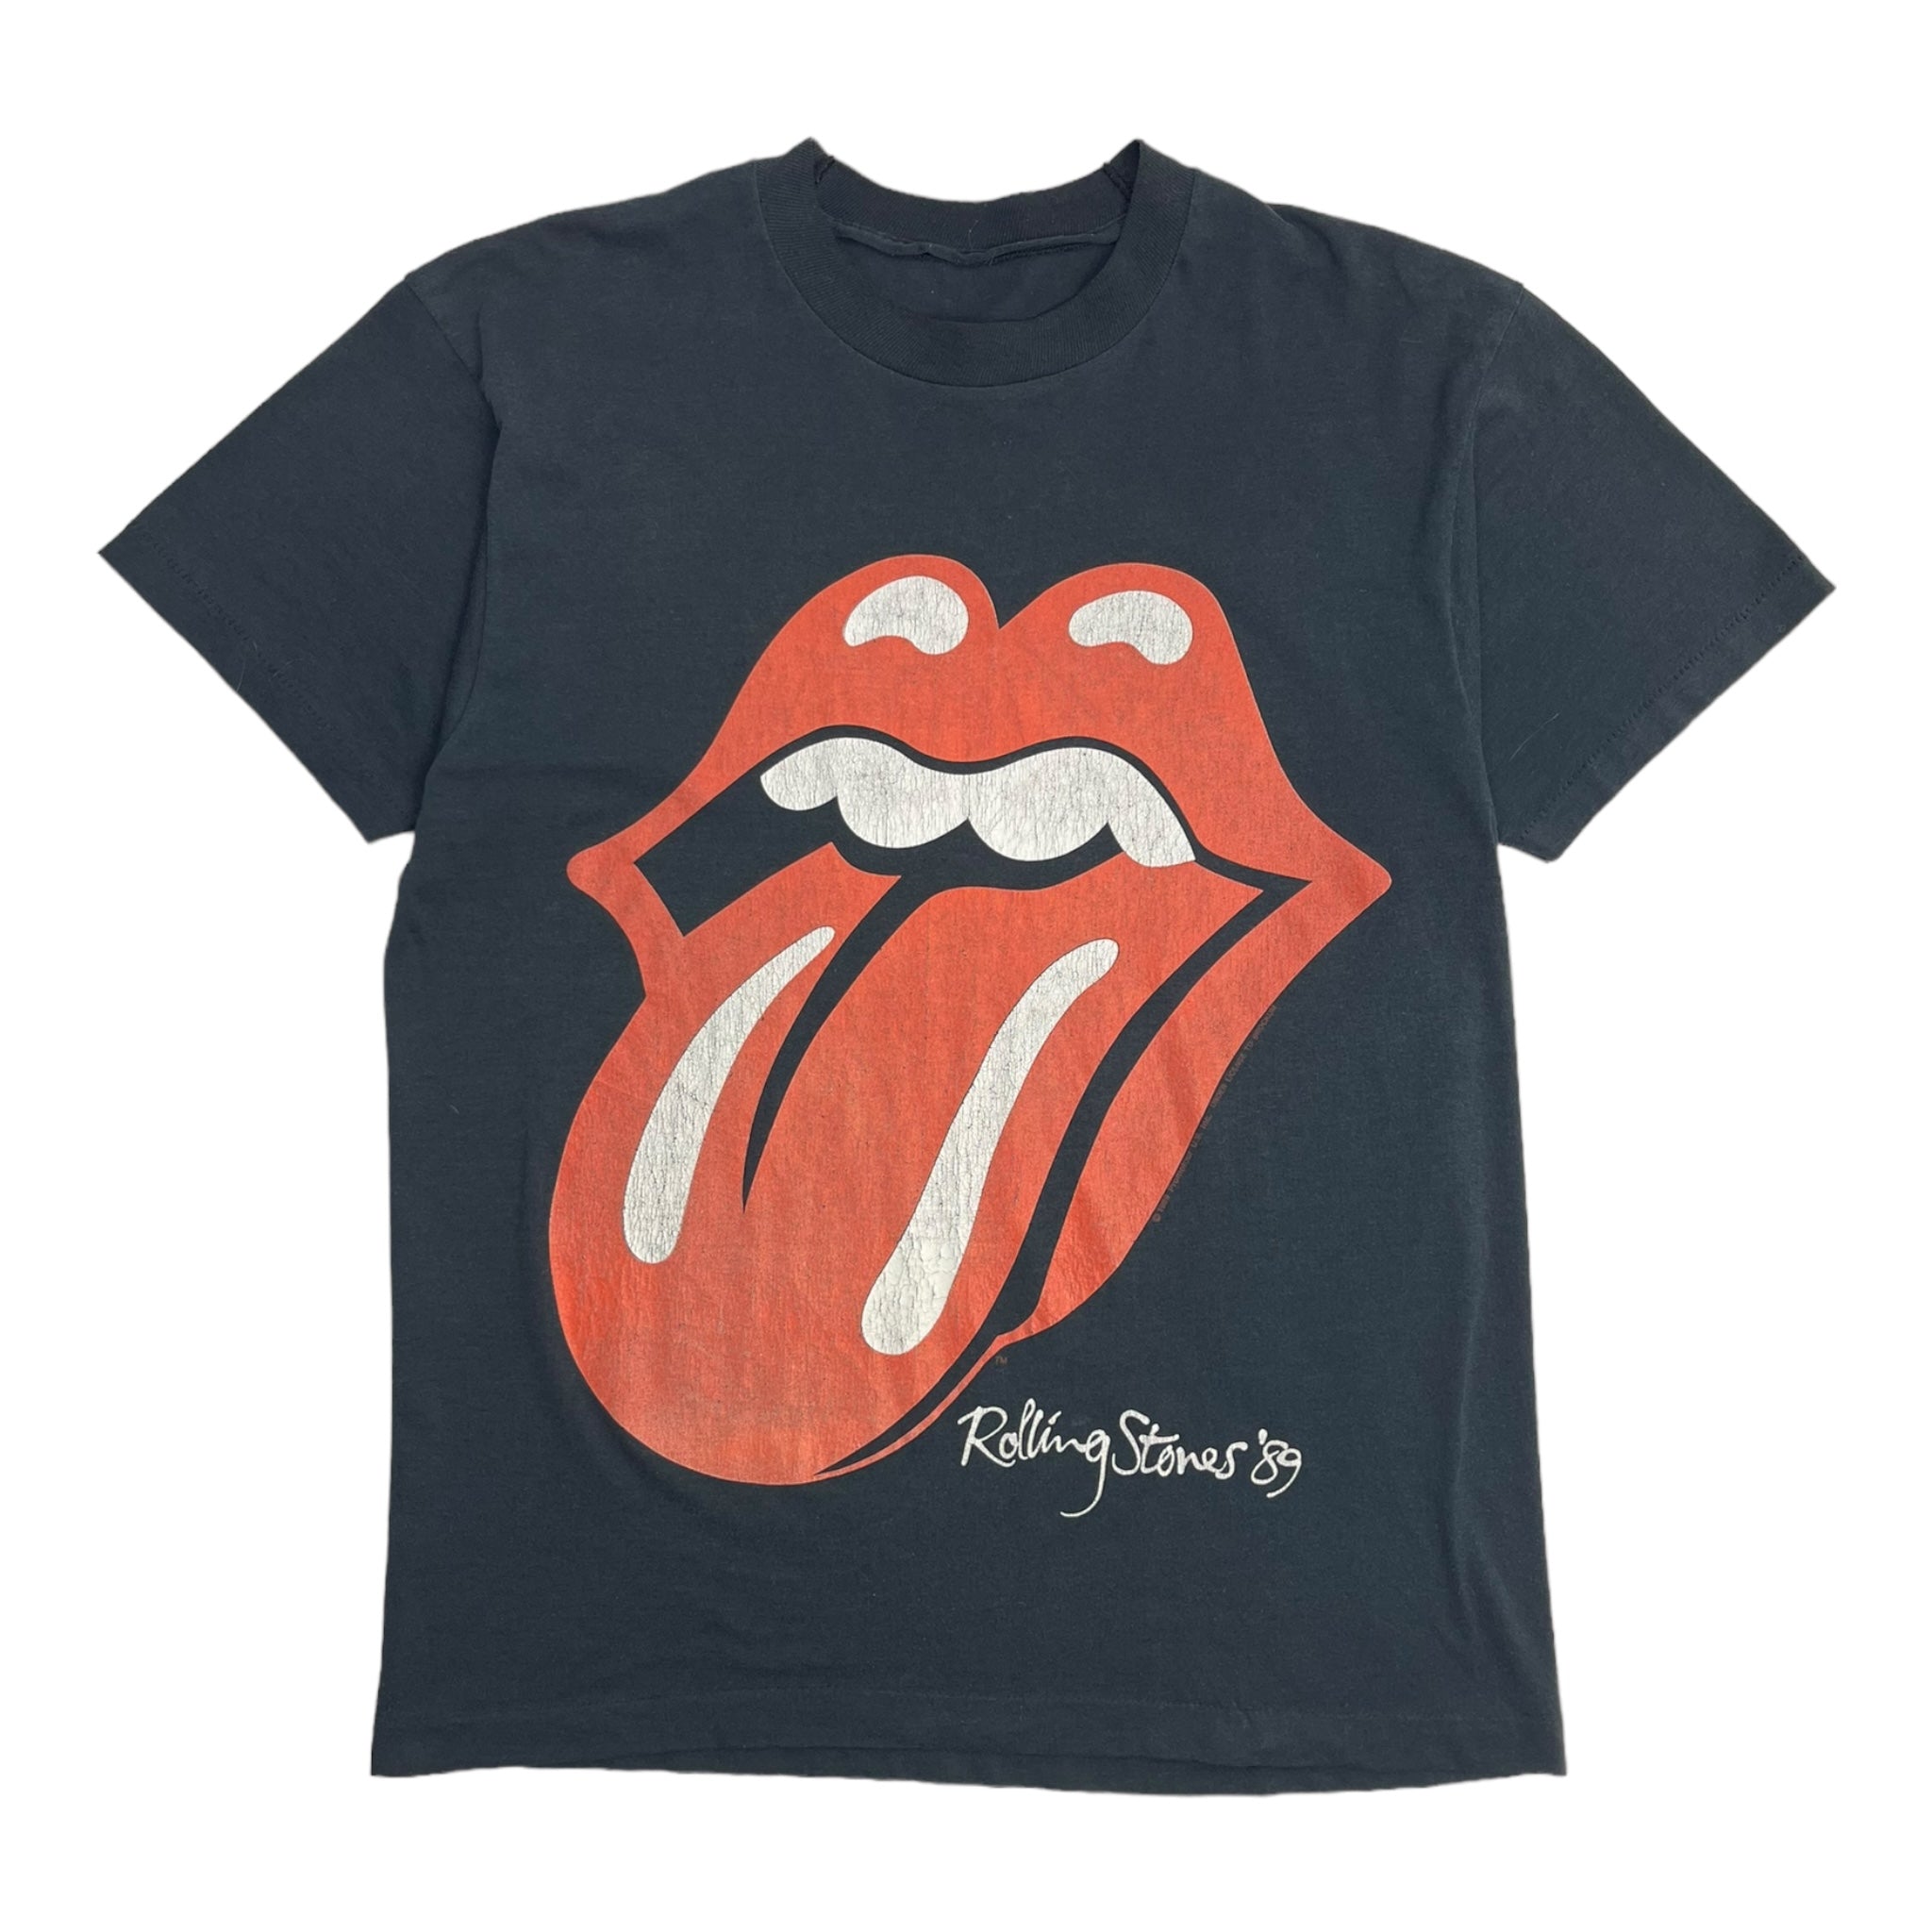 1989 The Rolling Stones “The Canadian Tour” T-Shirt